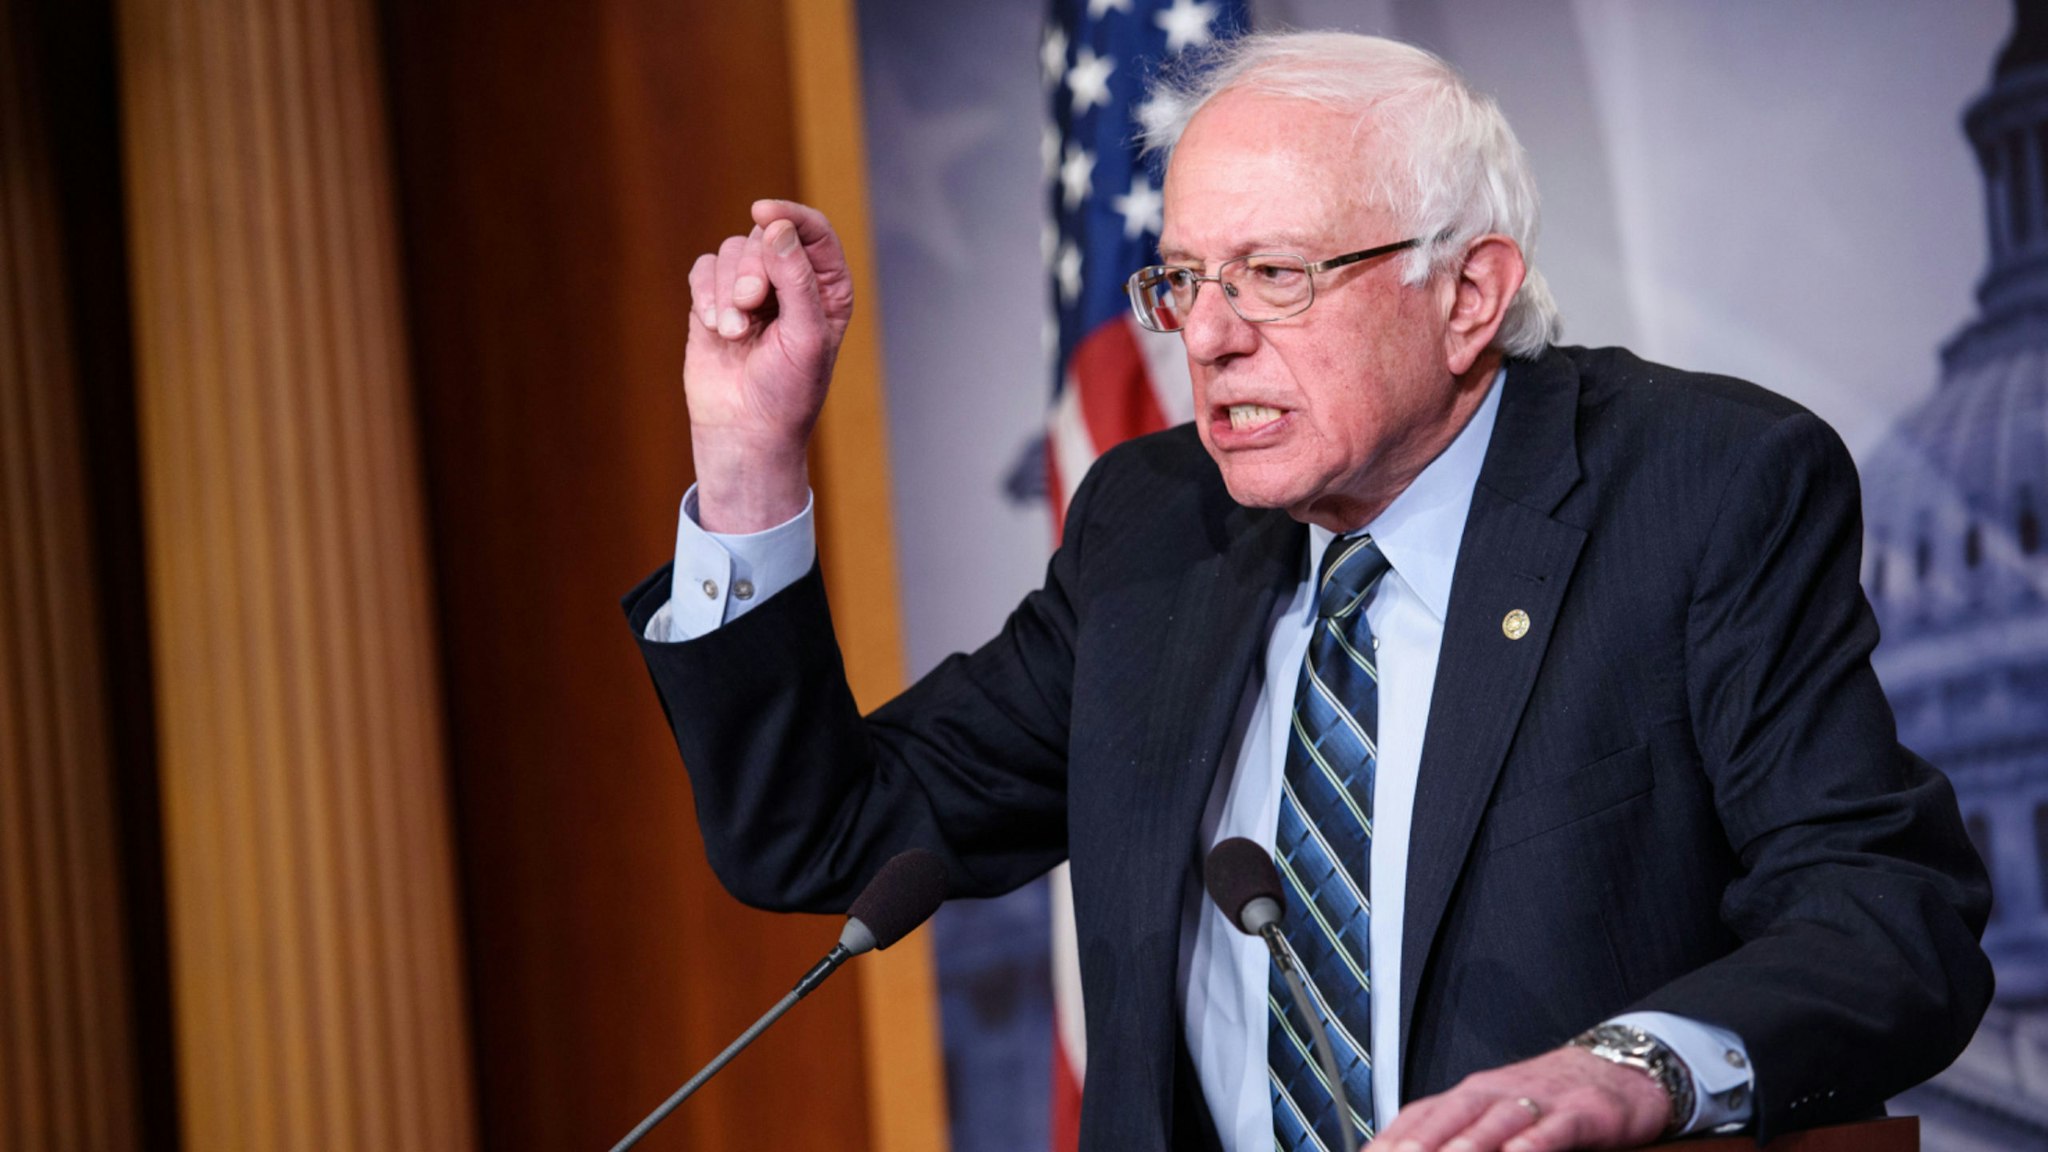 Senator Bernie Sanders, I-VT, speaks after the Senate voted to withdraw support for Saudi Arabia's war in Yemen, in the Senate TV studio at the US Capitol in Washington, DC on December 13, 2018.